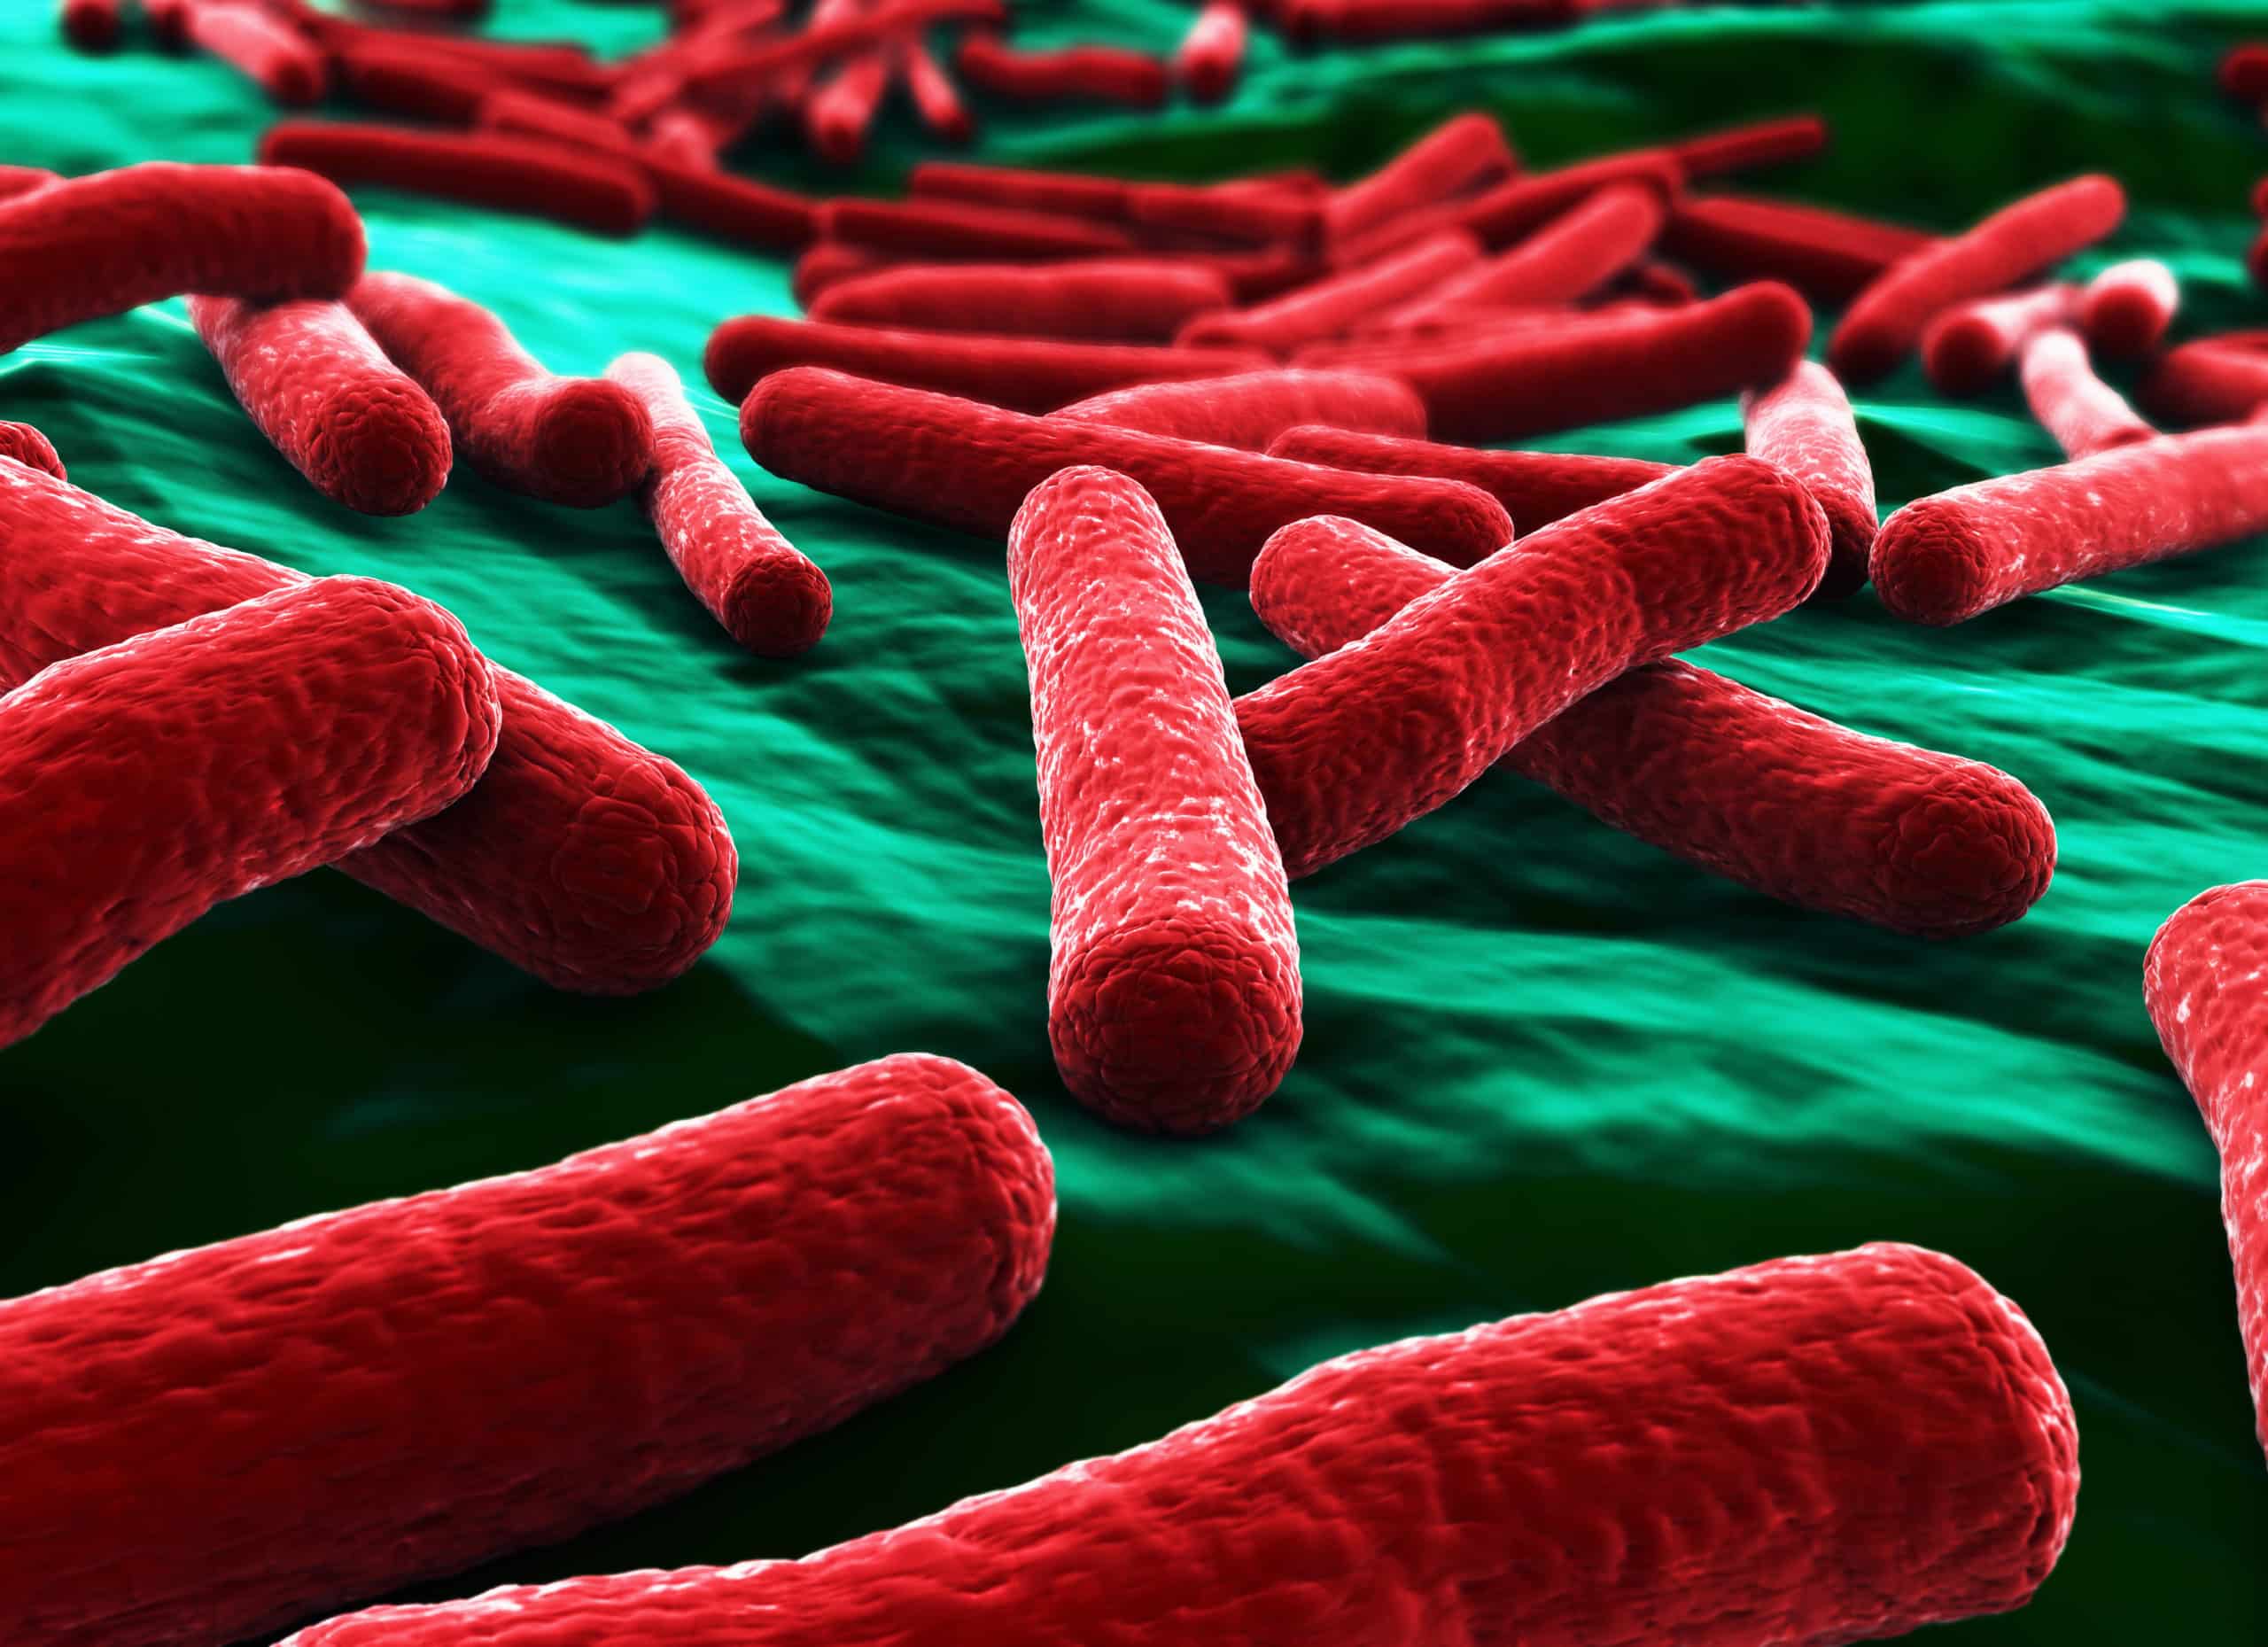 E. coli may hold one of the keys to treating Parkinson’s